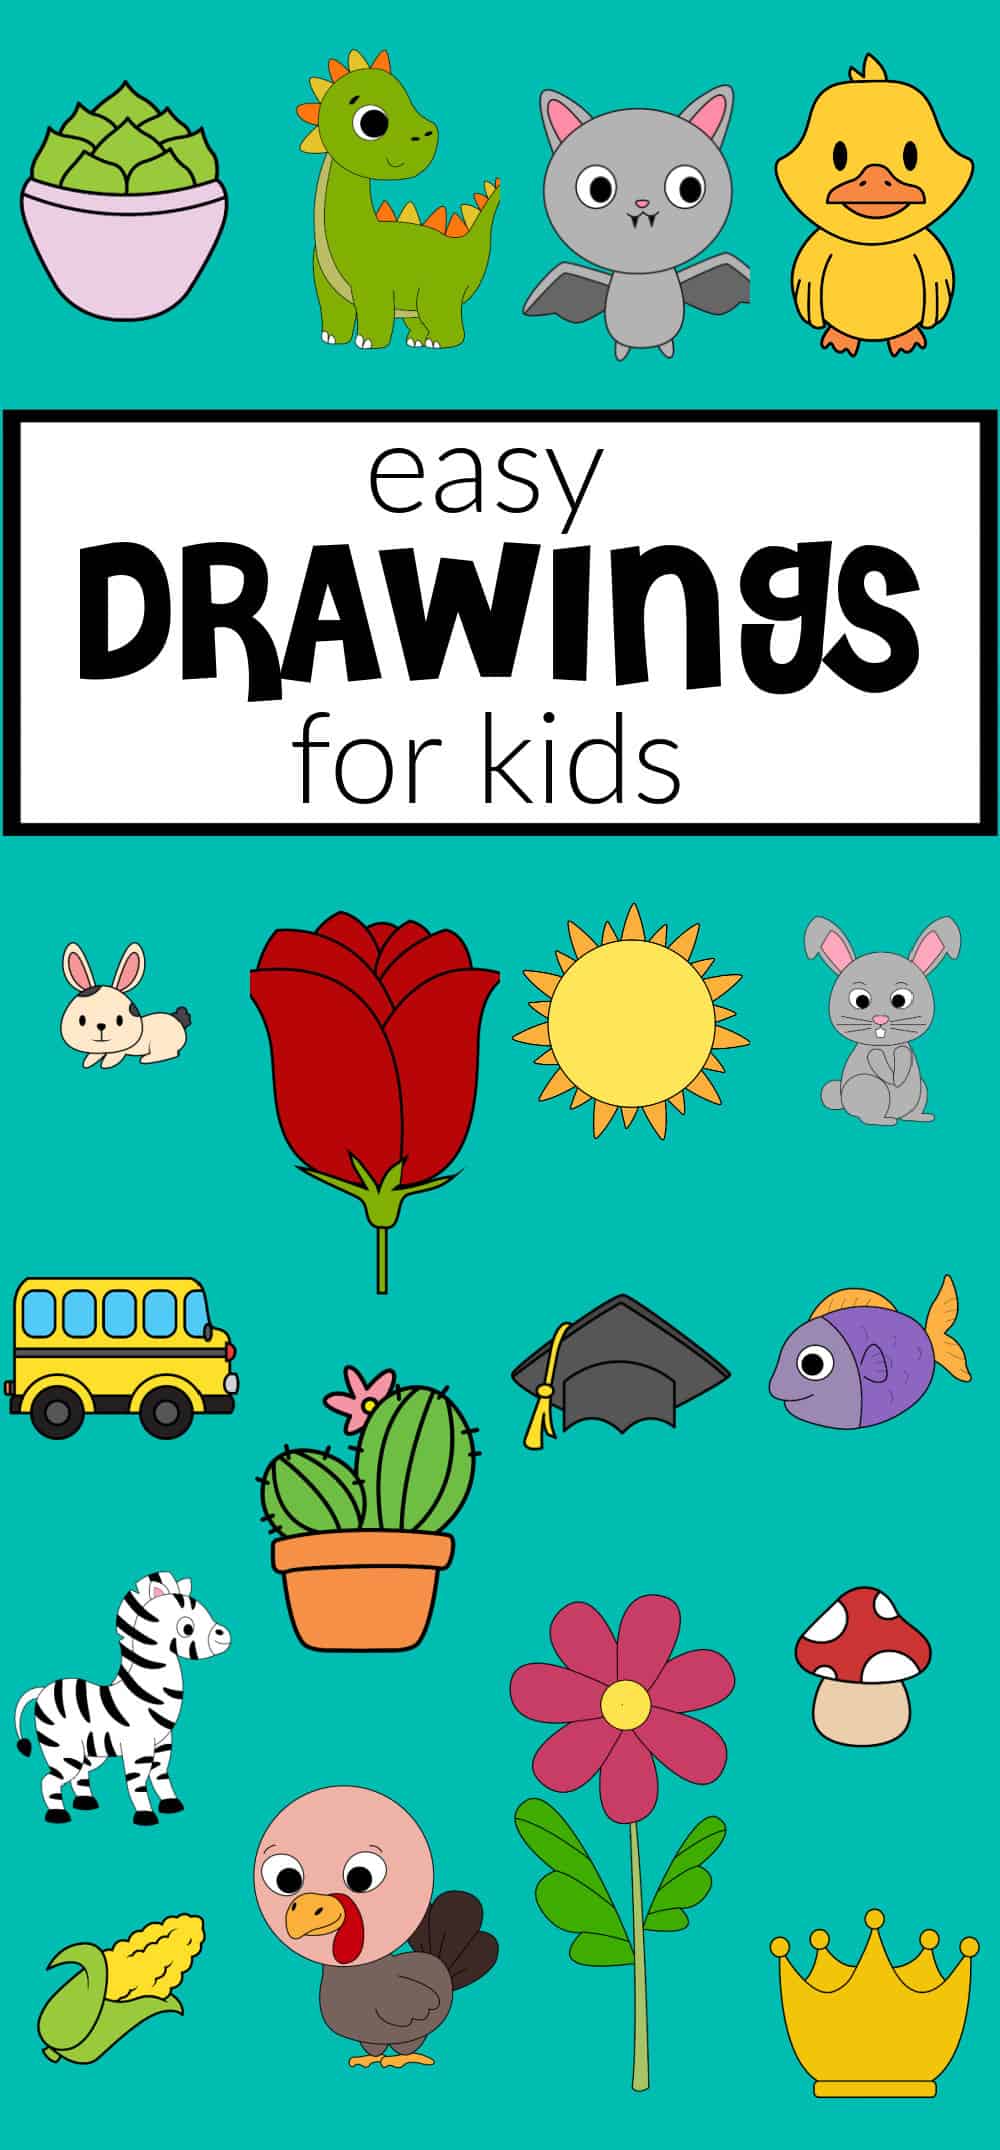 https://www.madewithhappy.com/wp-content/uploads/how-to-draw.jpg